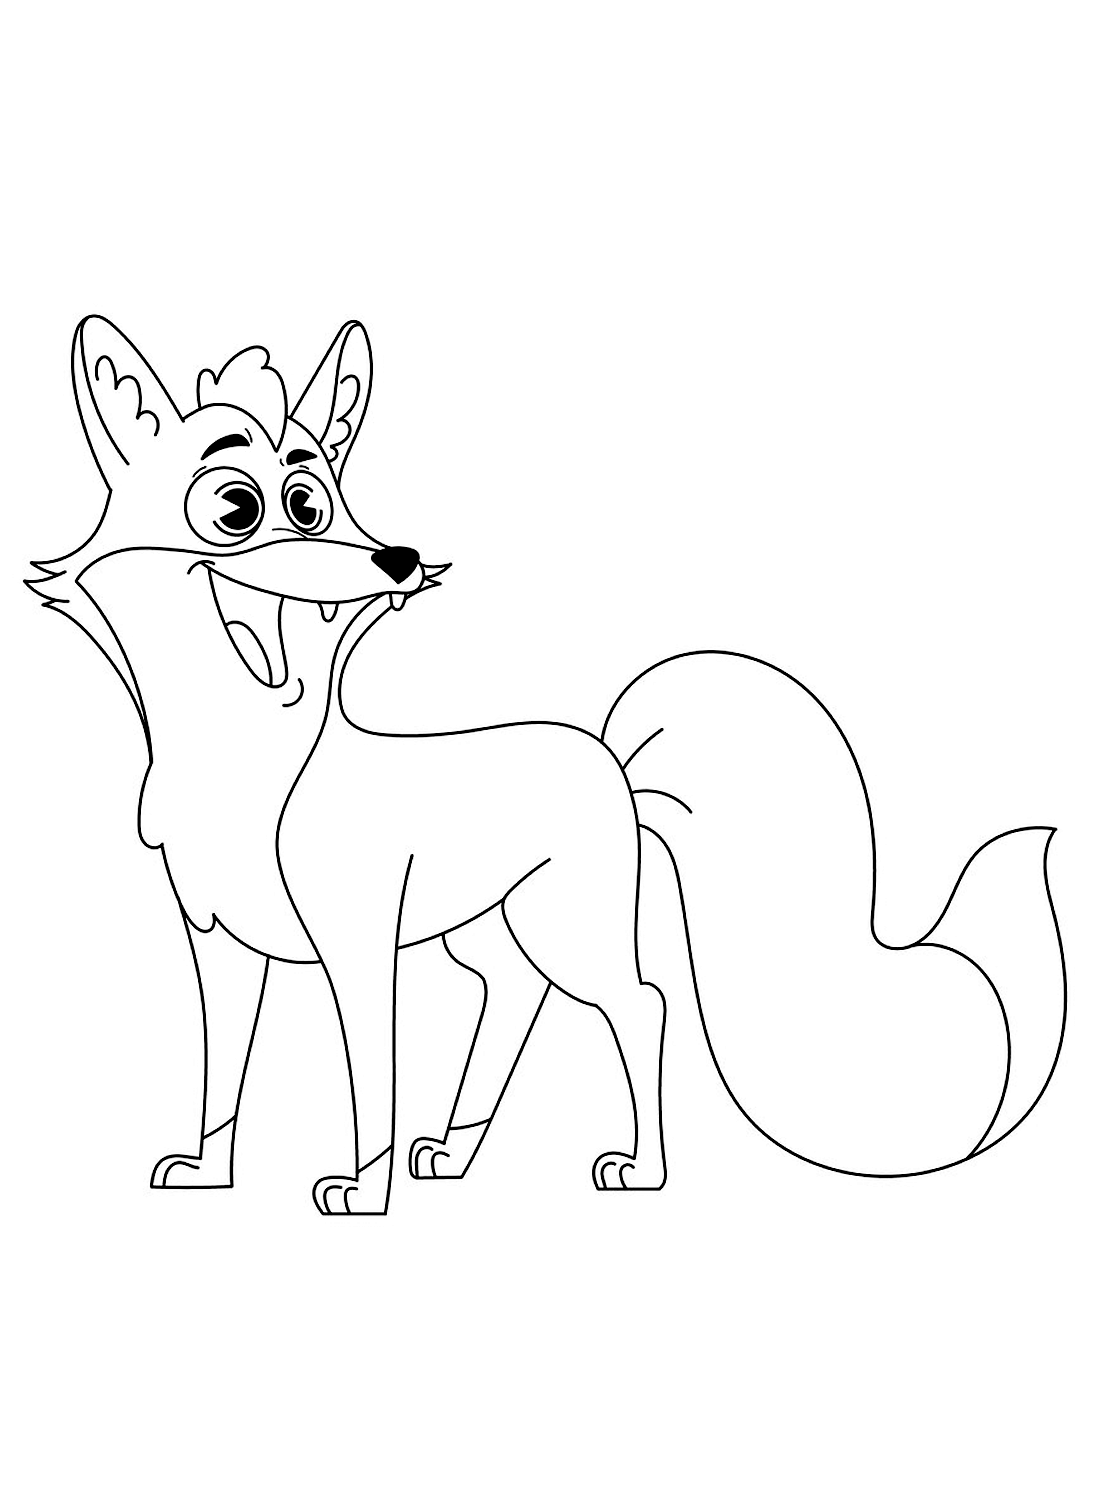 A Happy Fox Coloring Page for Kids from Fox